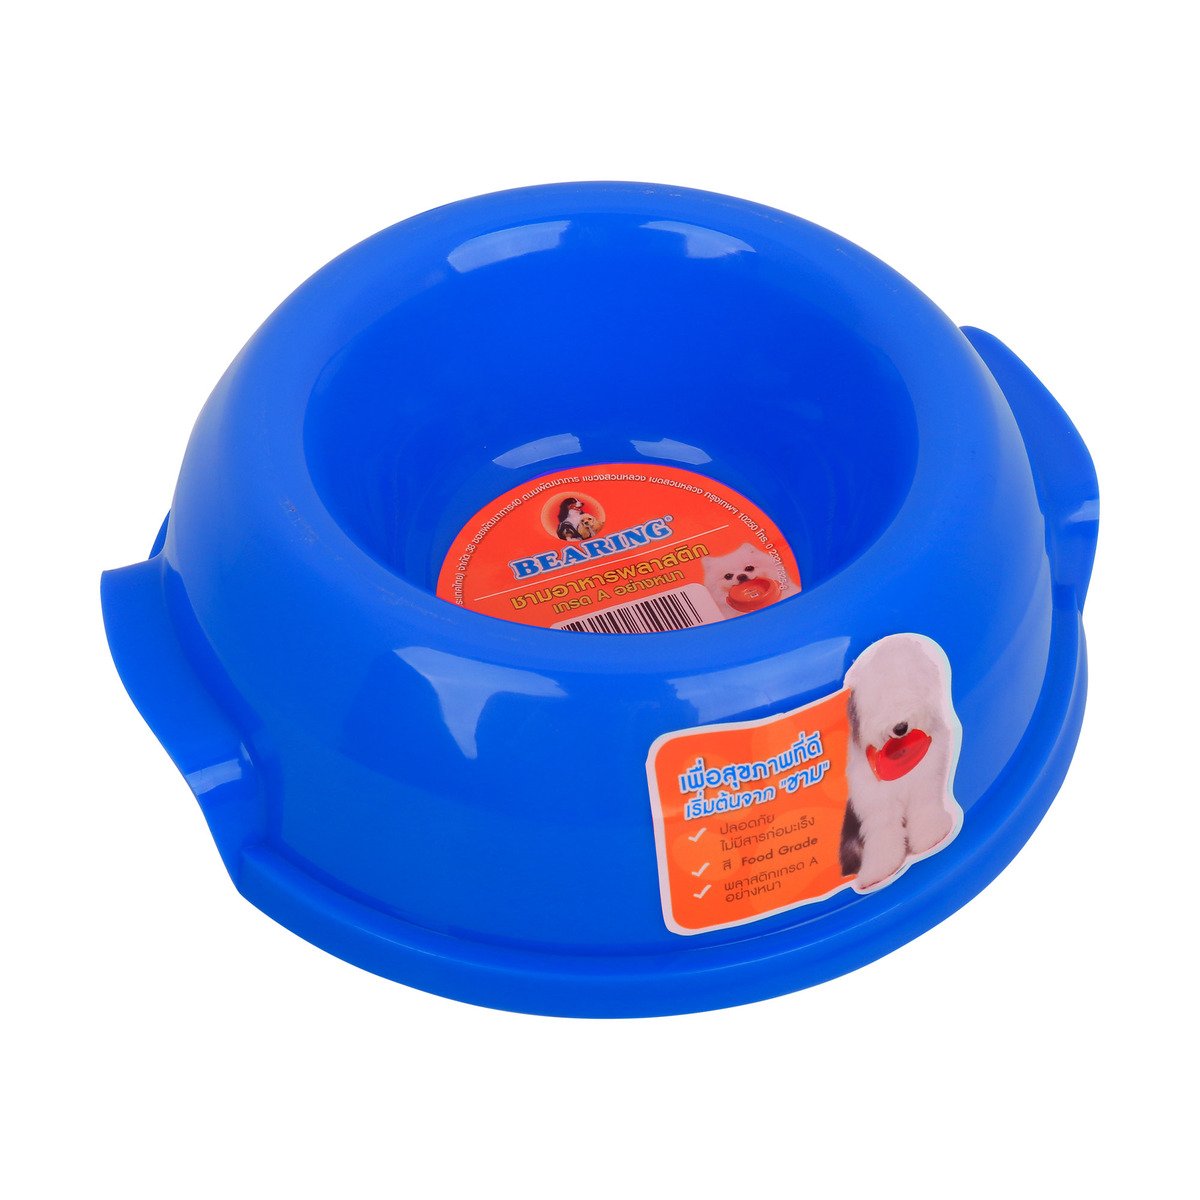 Bearing Pet Bowl, Round, Size Small, Assorted, 1 pc